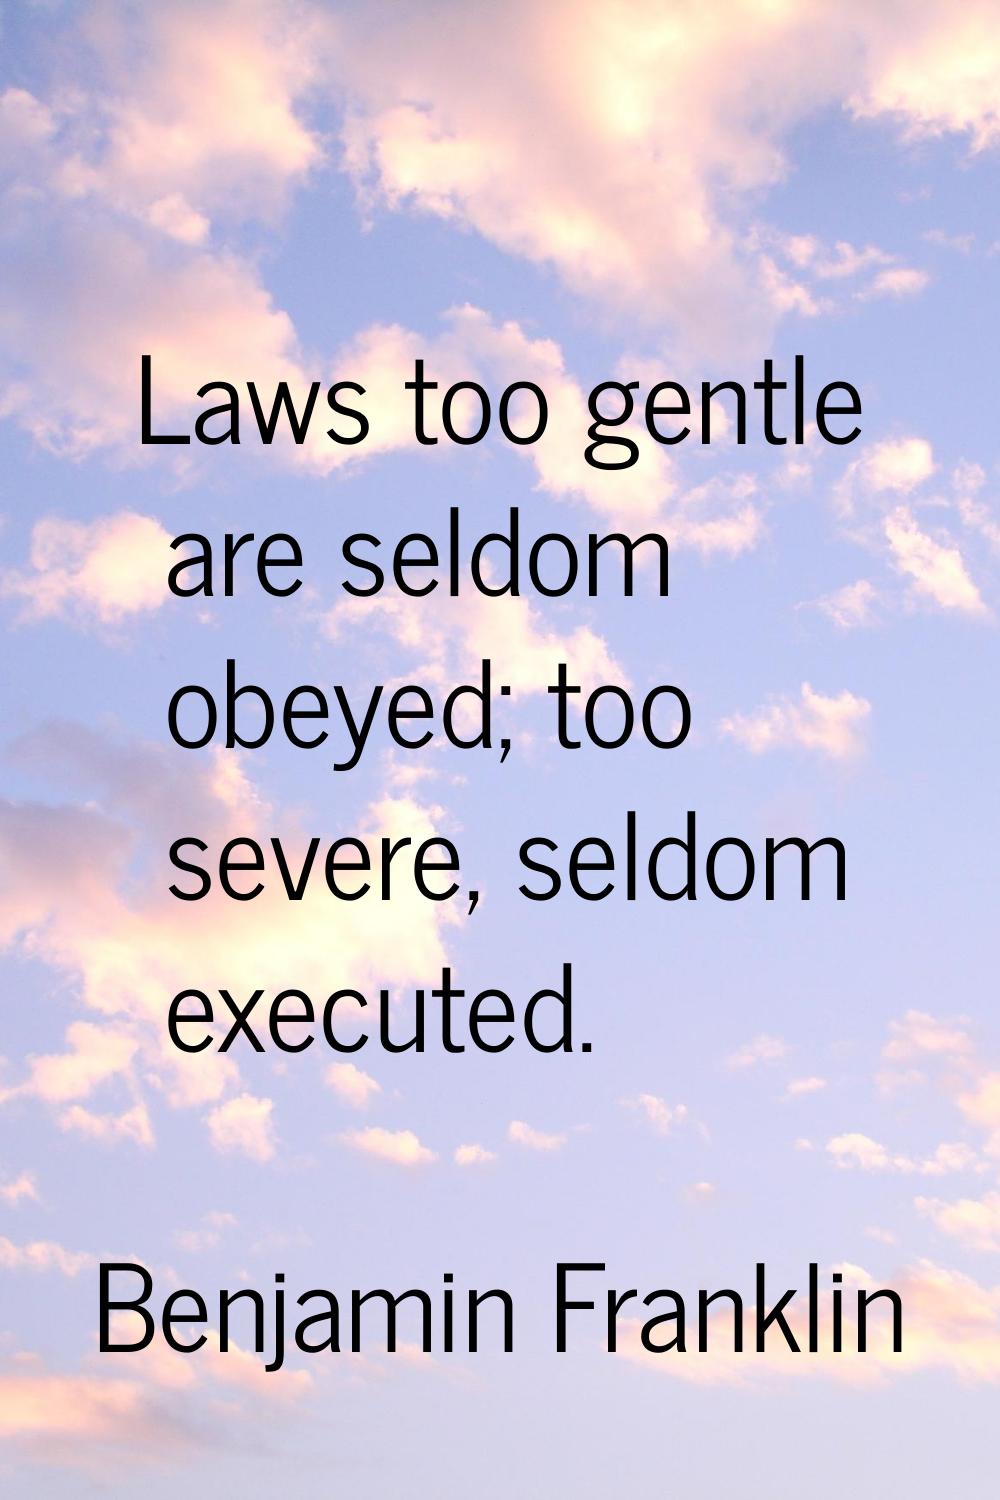 Laws too gentle are seldom obeyed; too severe, seldom executed.